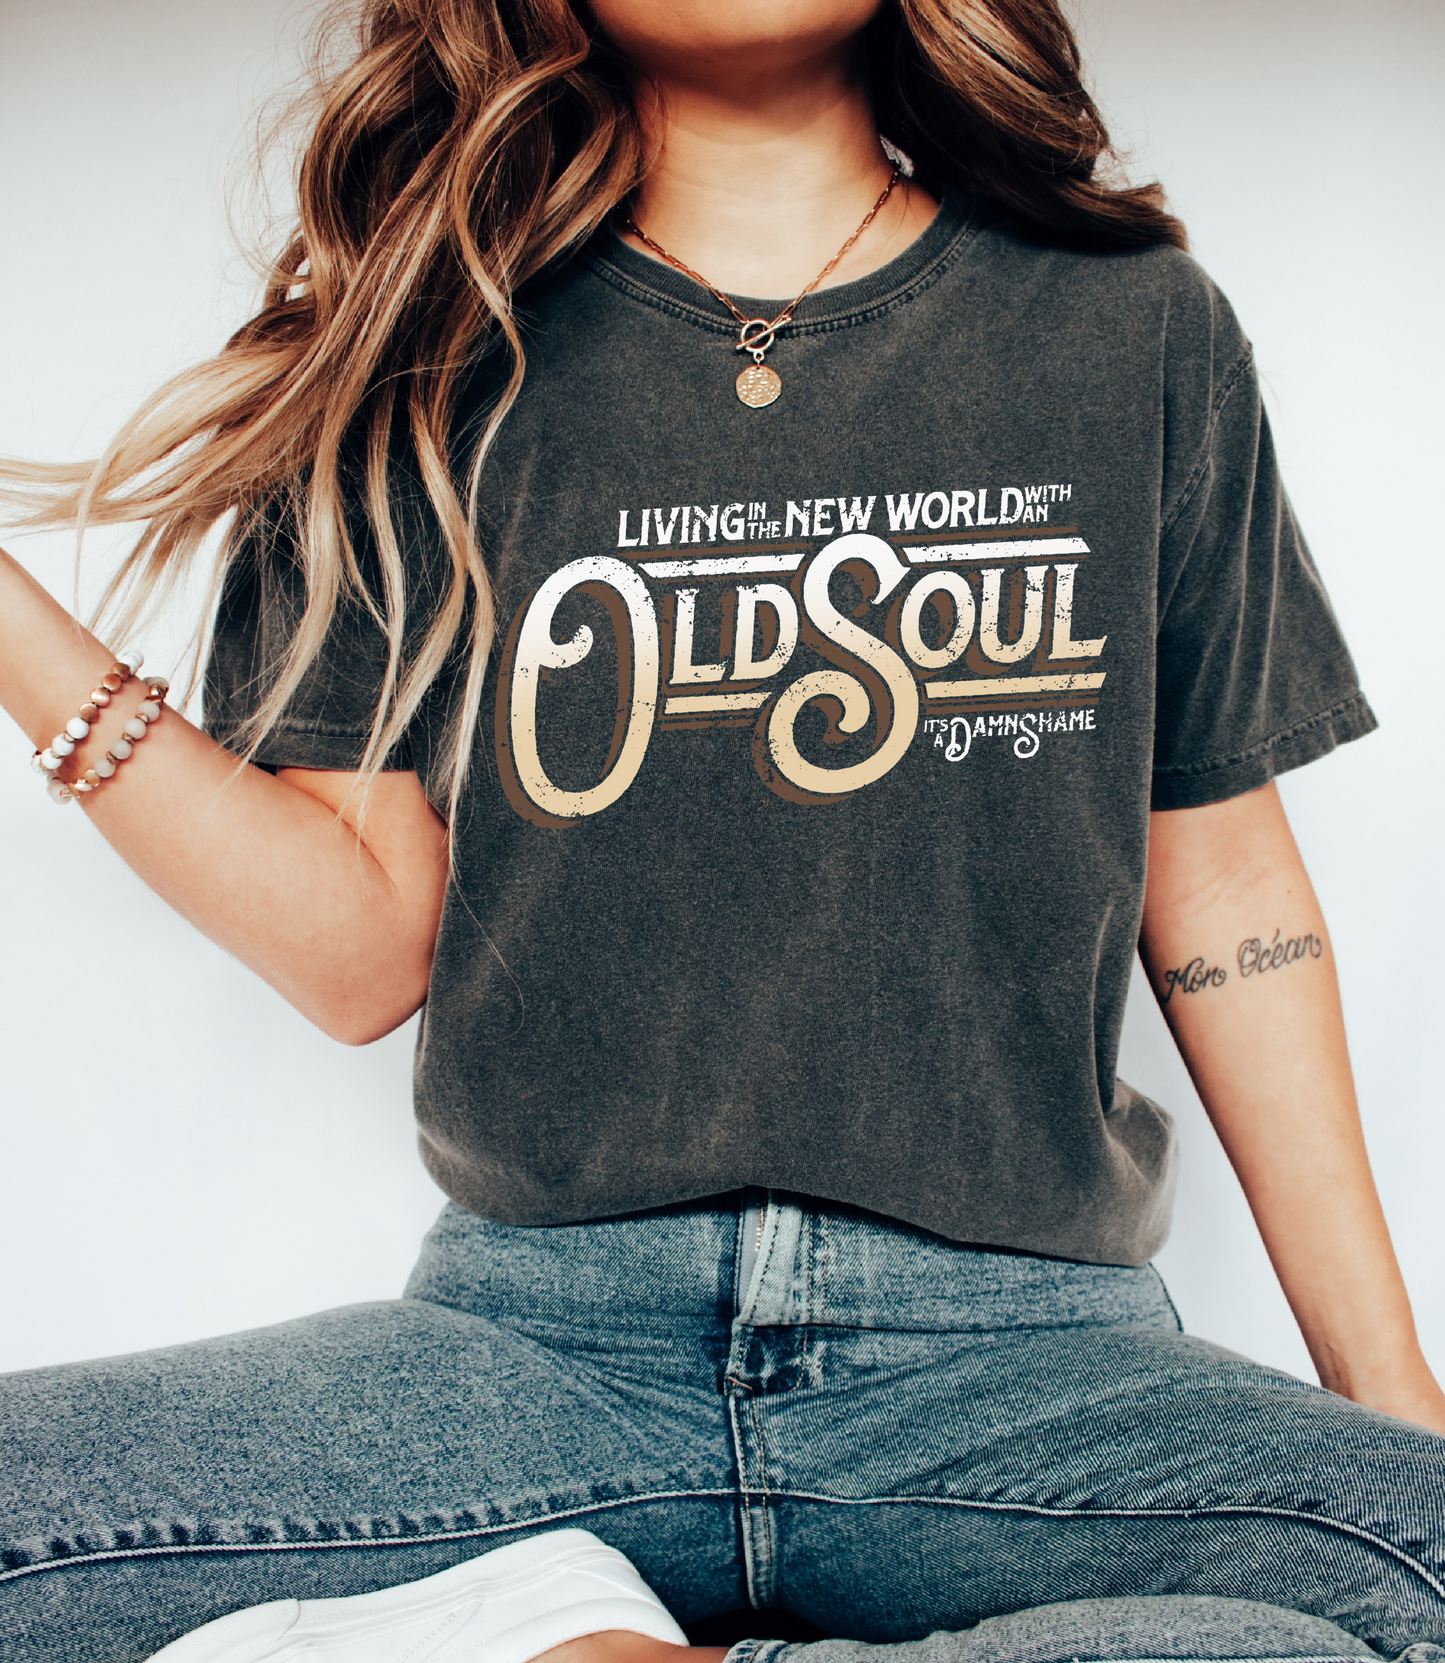 Living In the New World With An Old Soul Tee/ CC or Bella / Country Western Tee/ Oliver Anthony